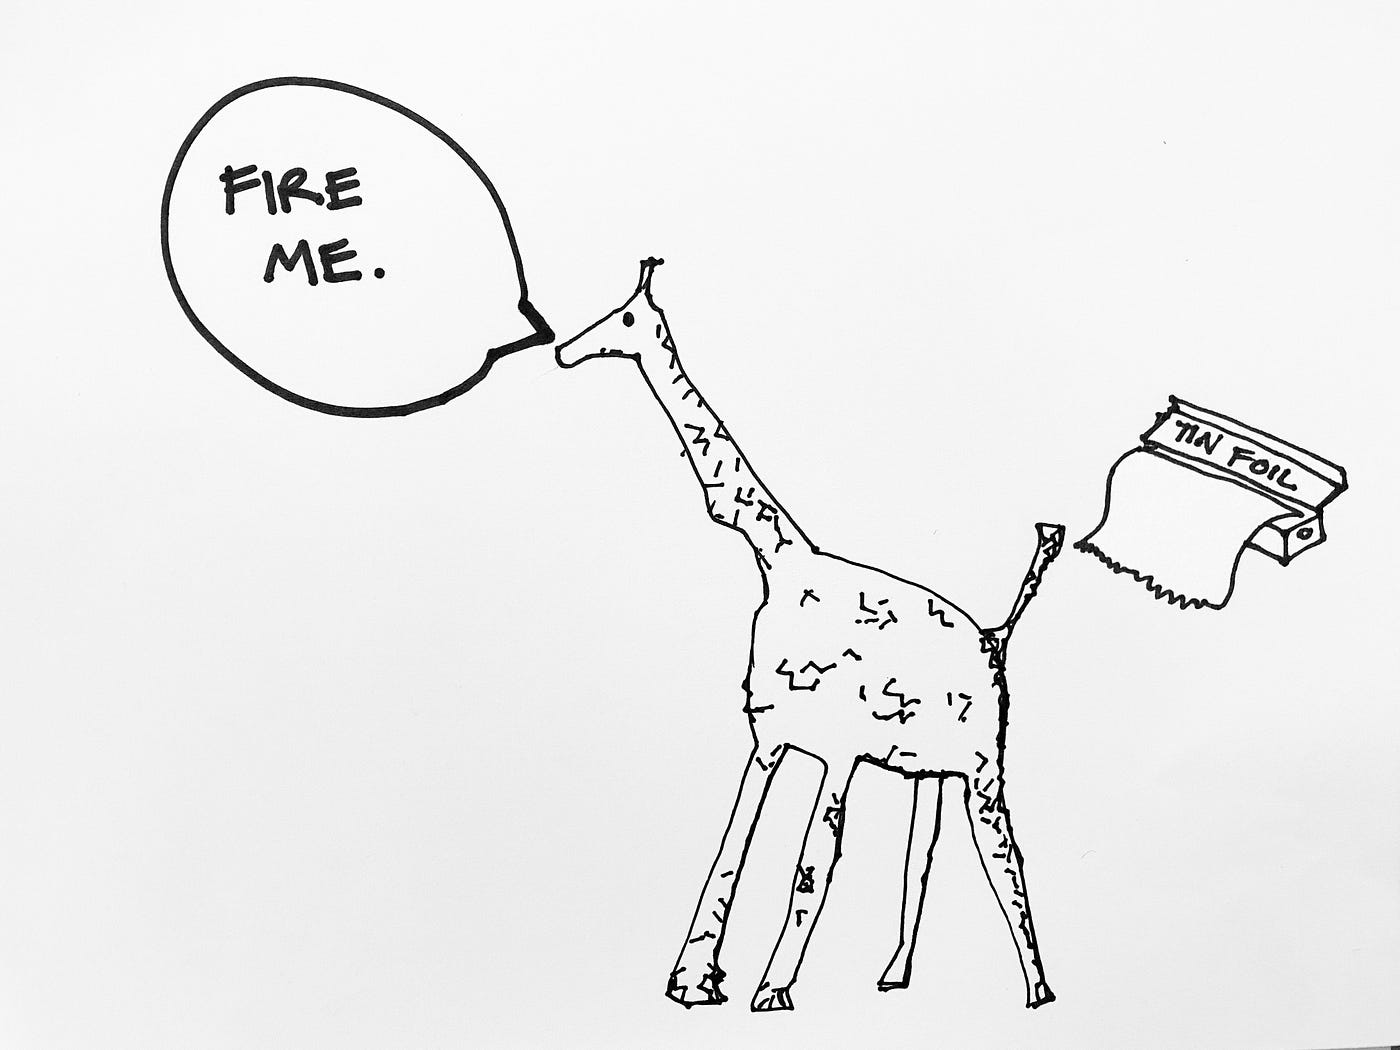 A sketch of a tinfoil giraffe, saying “Fire me,” related to the story about prototypes being aligned with your idea.